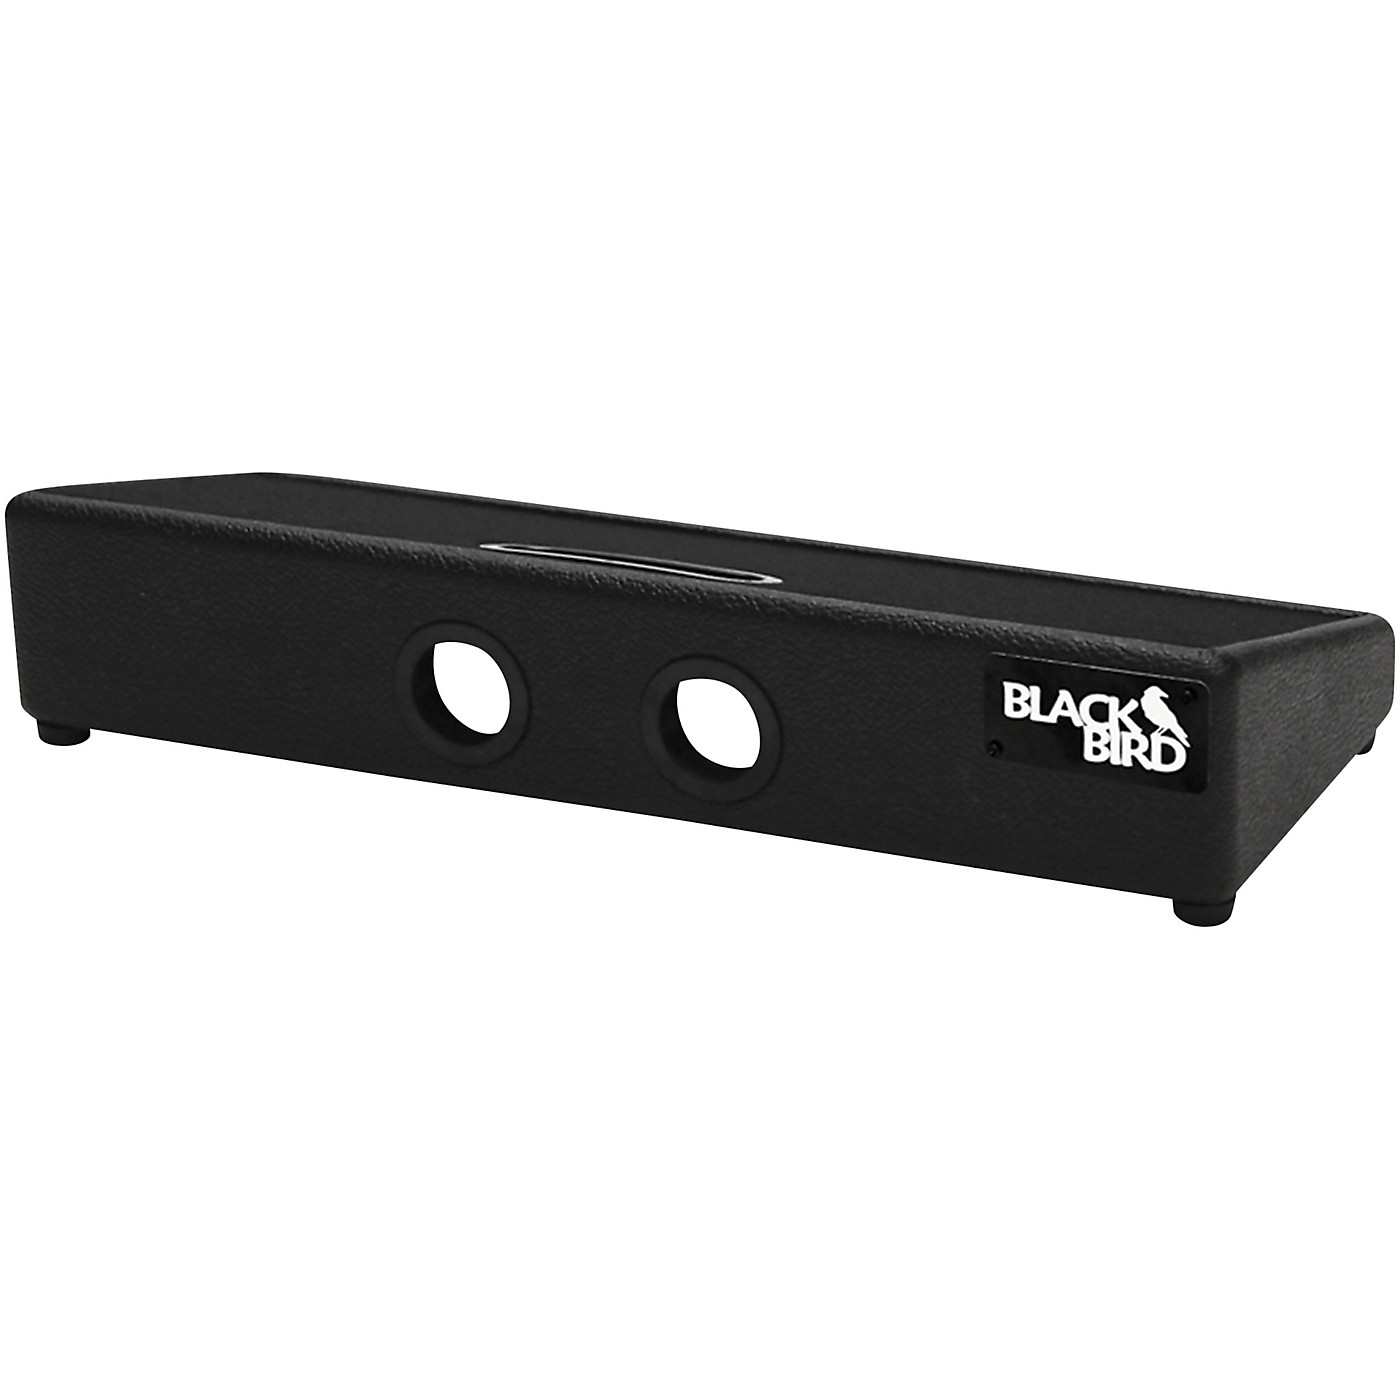 Blackbird Pedalboards Feather Pedalboard and Gig Bag Black Tolex thumbnail